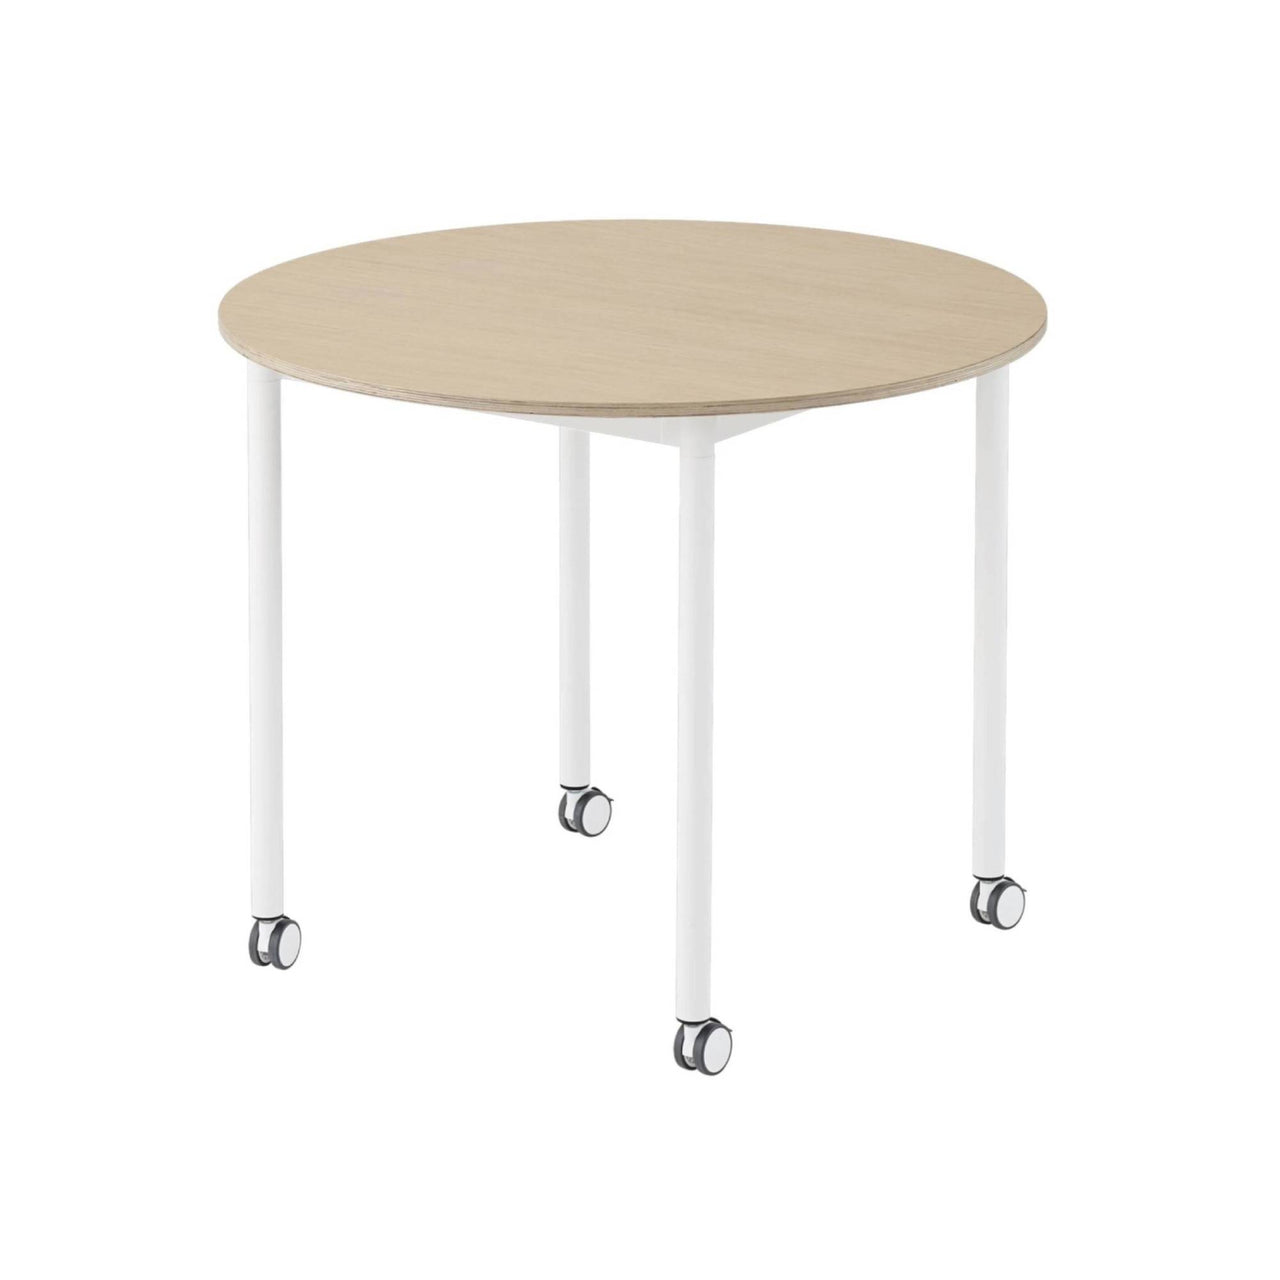 Base Table with Castors: Round + Small - 35.4